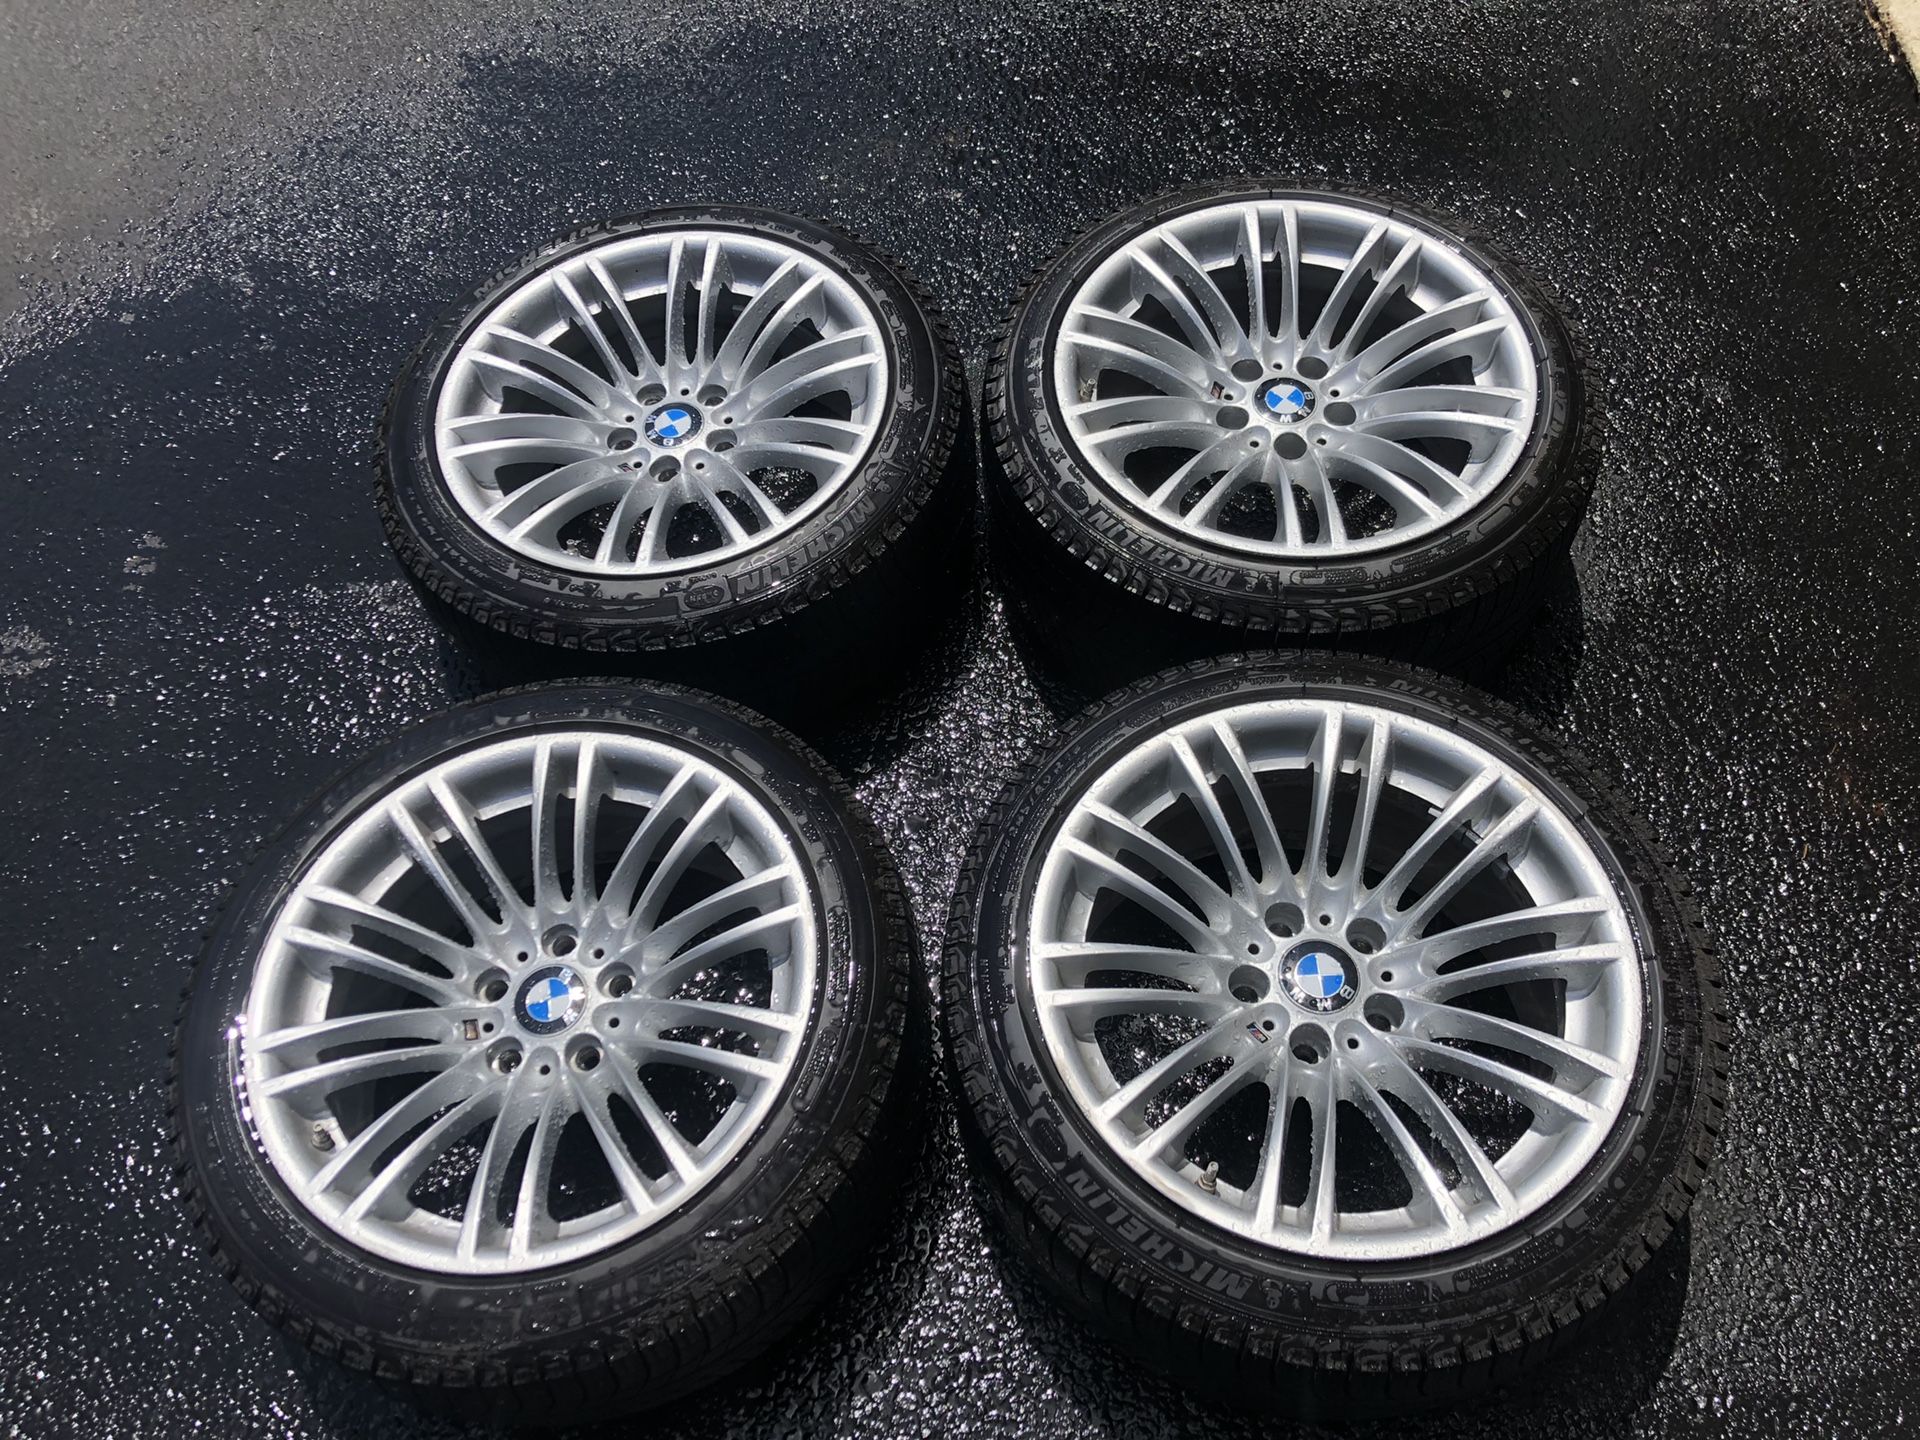 BMW OEM Wheels/Rims/Tires - Excellent condition - Brand New Michelin Tires